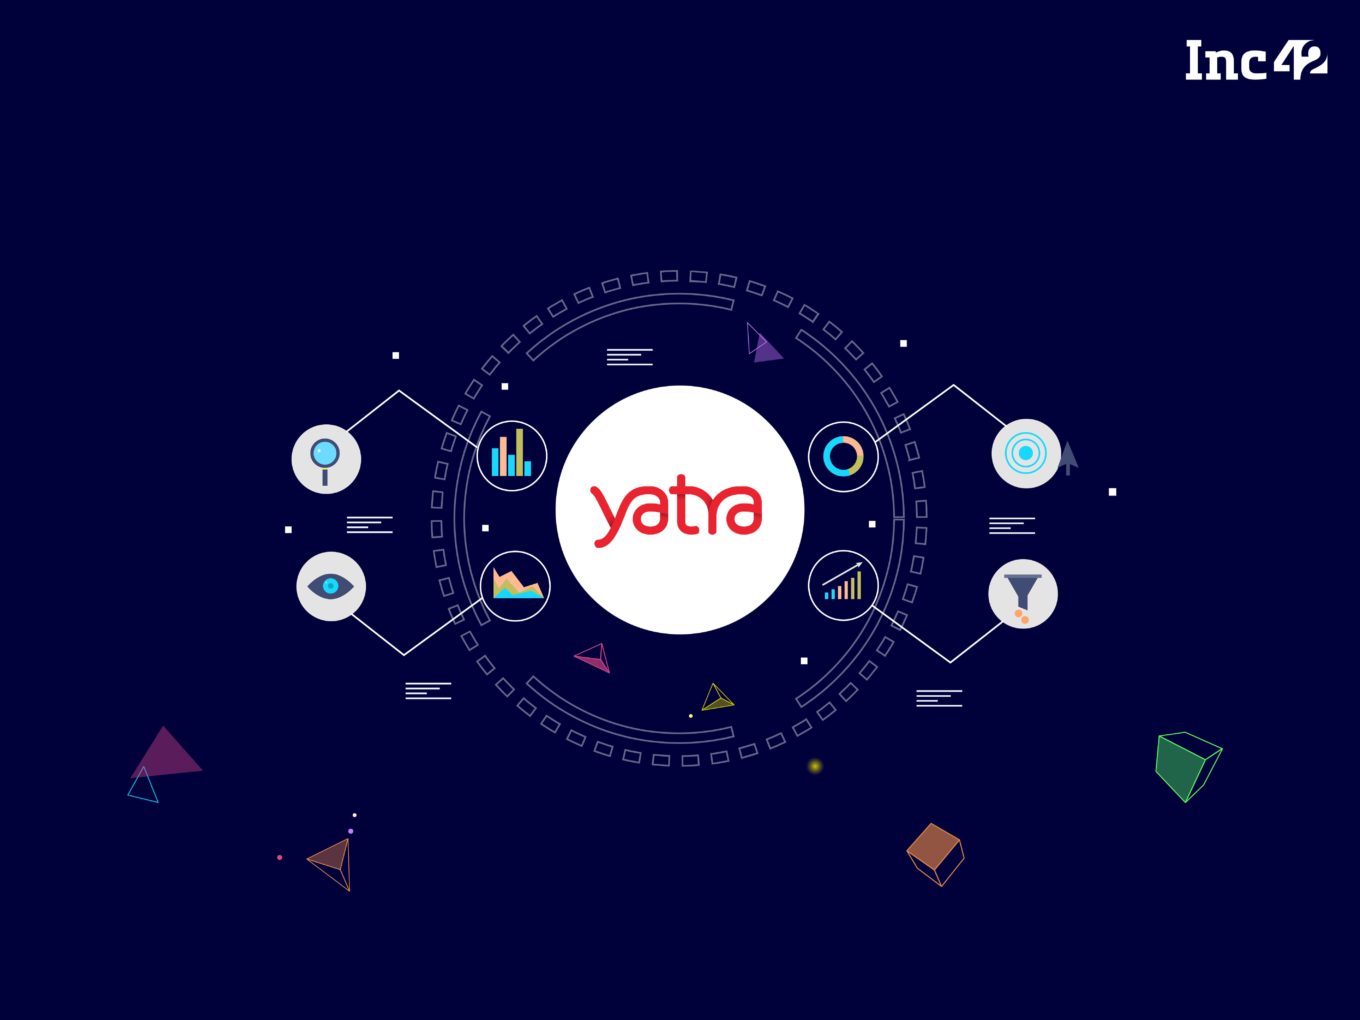 [What The Financials] Yatra Loses Revenue And Cuts Losses By 70%